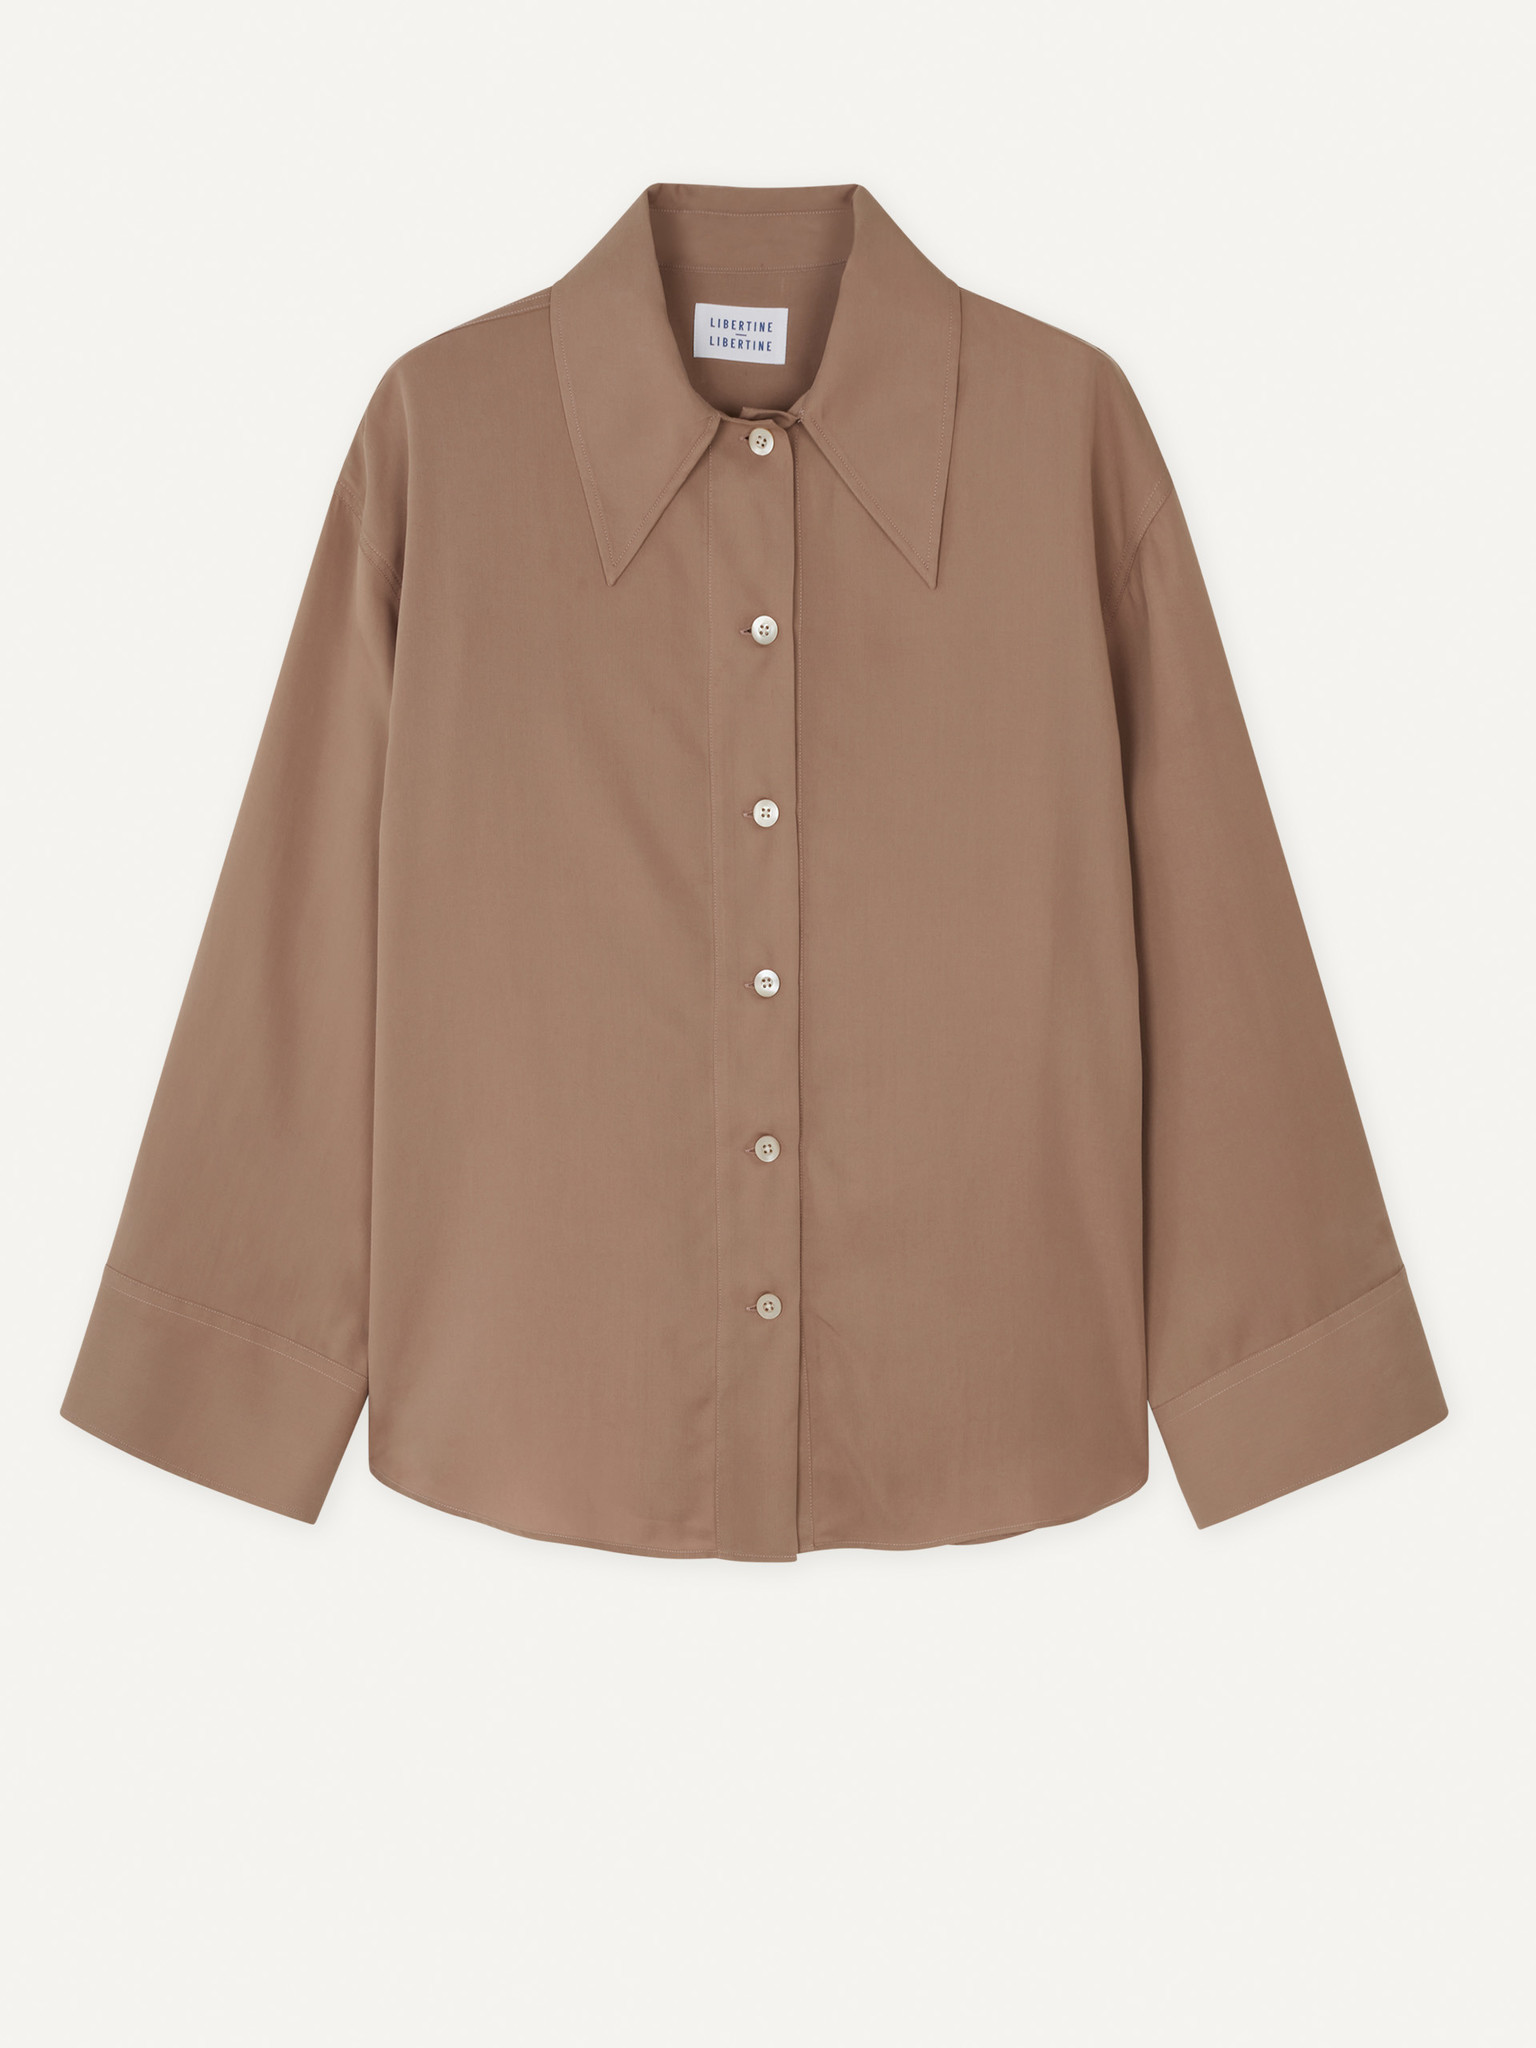 Mercy Blouse Camel Brown-2